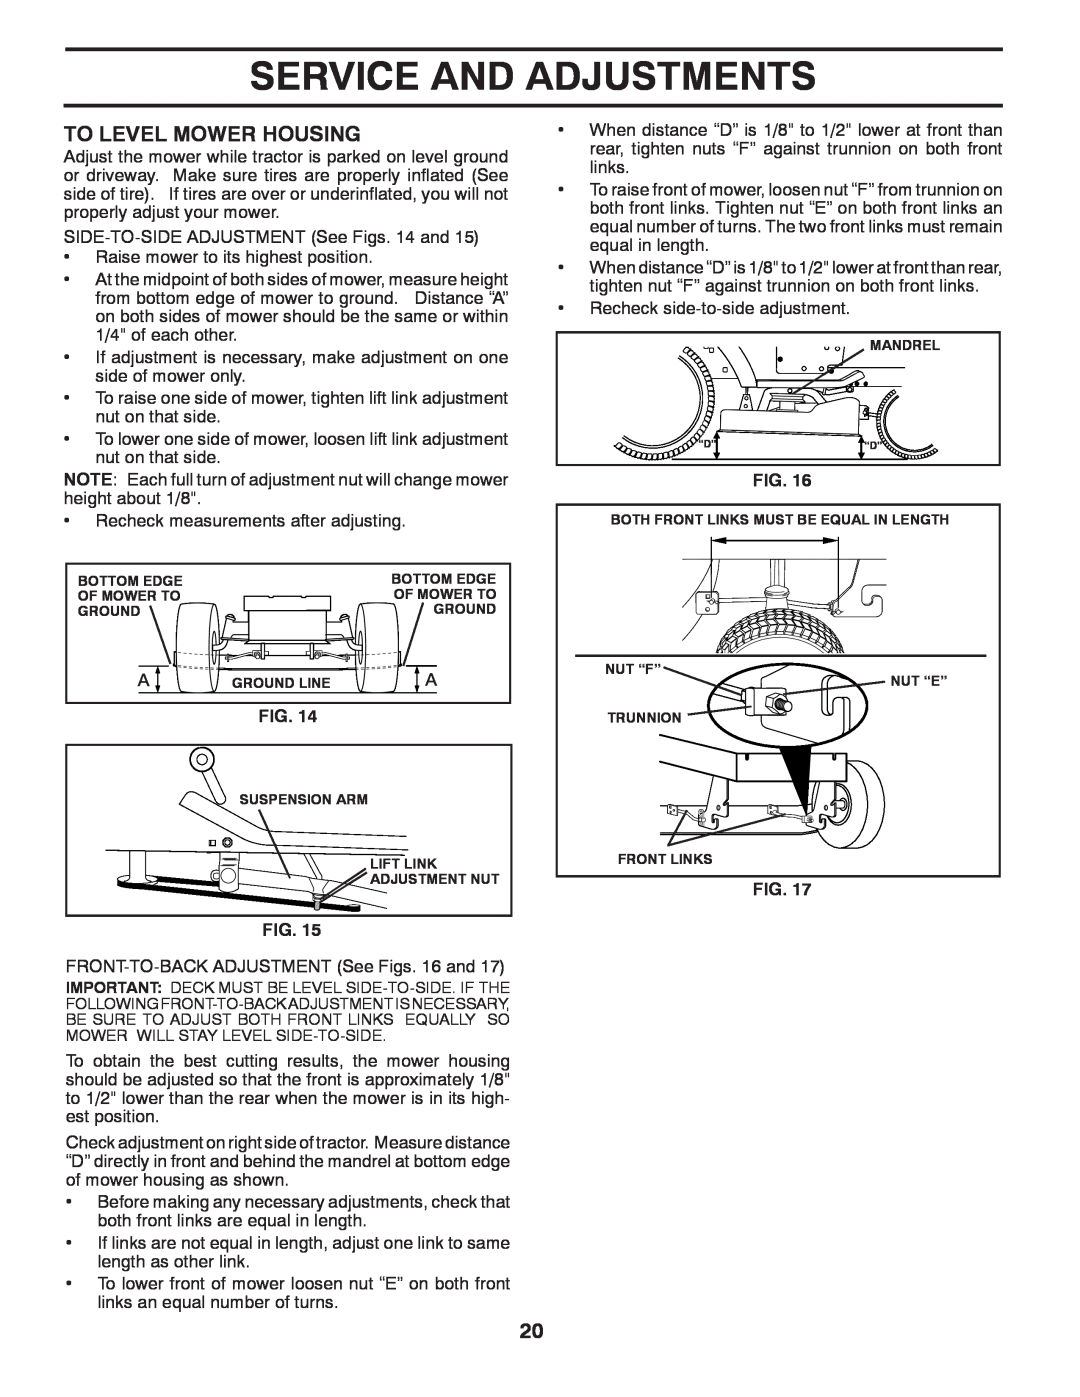 Poulan 96012006802, 414754 manual To Level Mower Housing, Service And Adjustments, Fig 